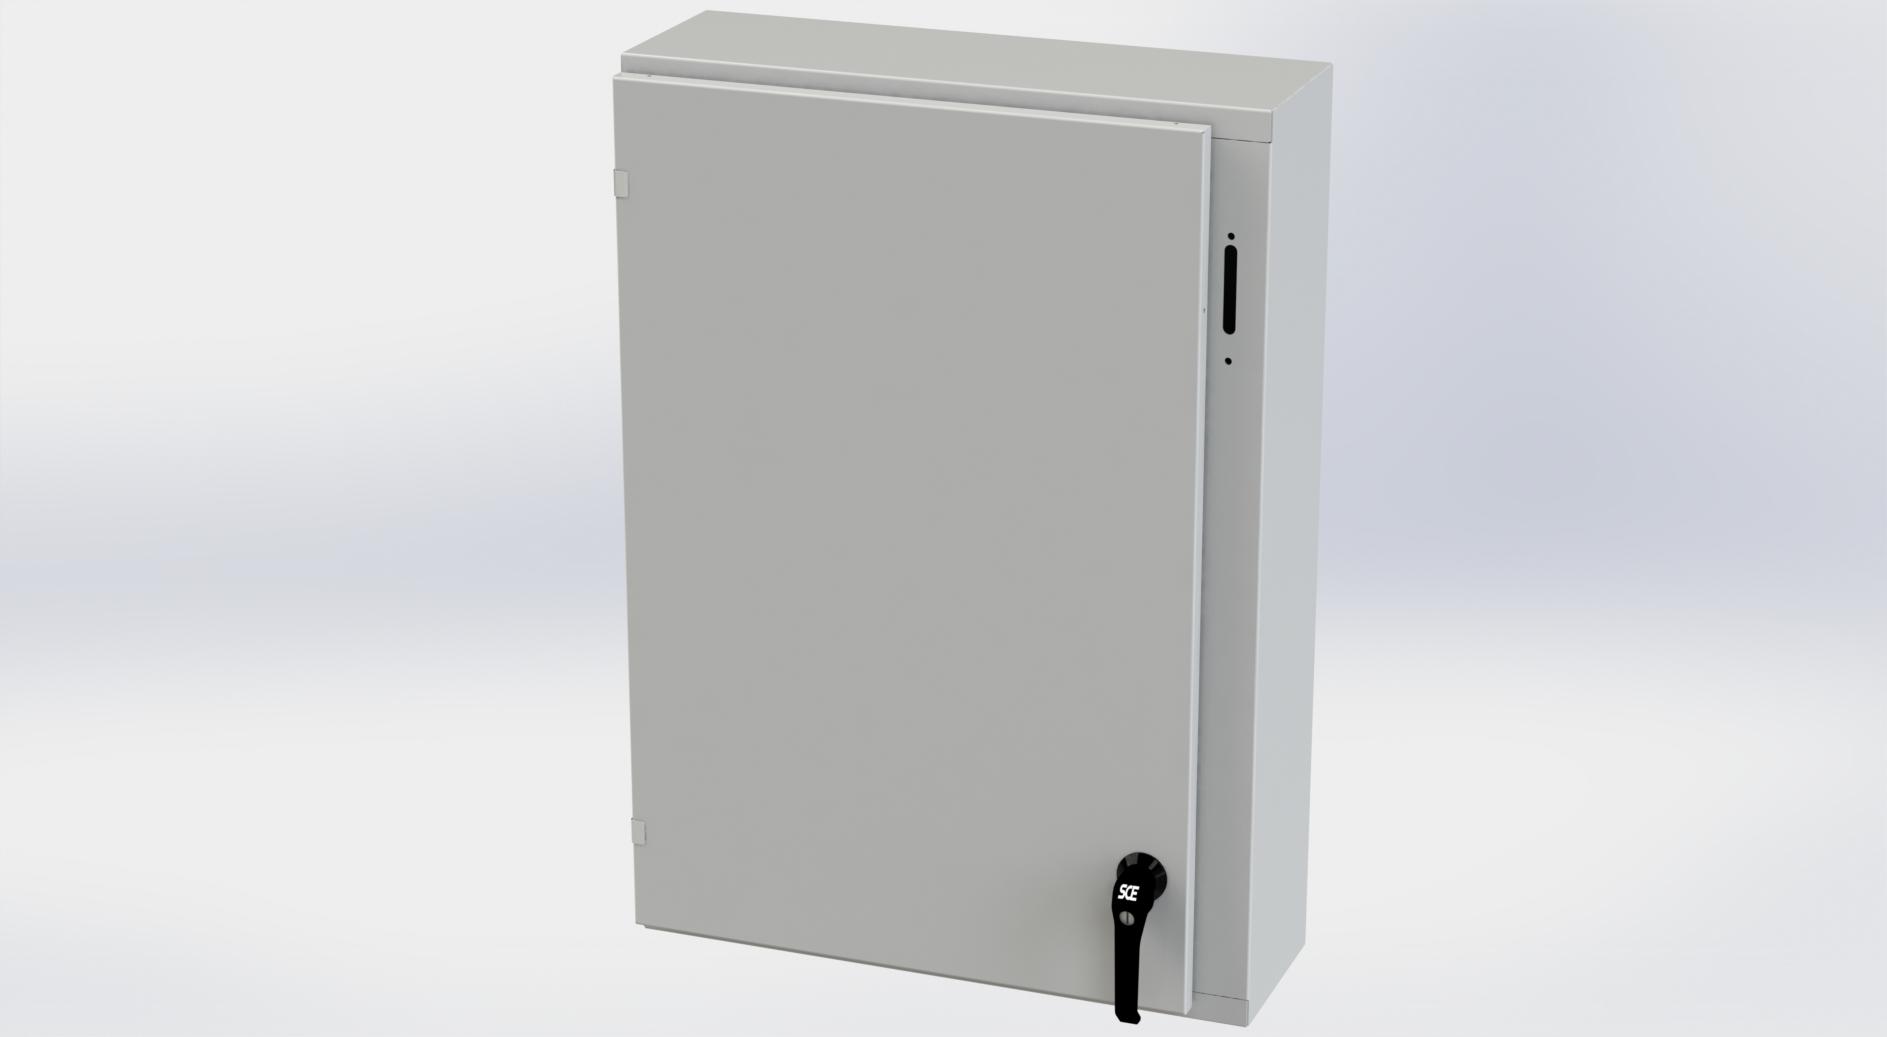 Saginaw Control SCE-36XEL2508LPLG XEL LP Enclosure, Height:36.00", Width:25.38", Depth:8.00", RAL 7035 gray powder coating inside and out. Optional sub-panels are powder coated white.